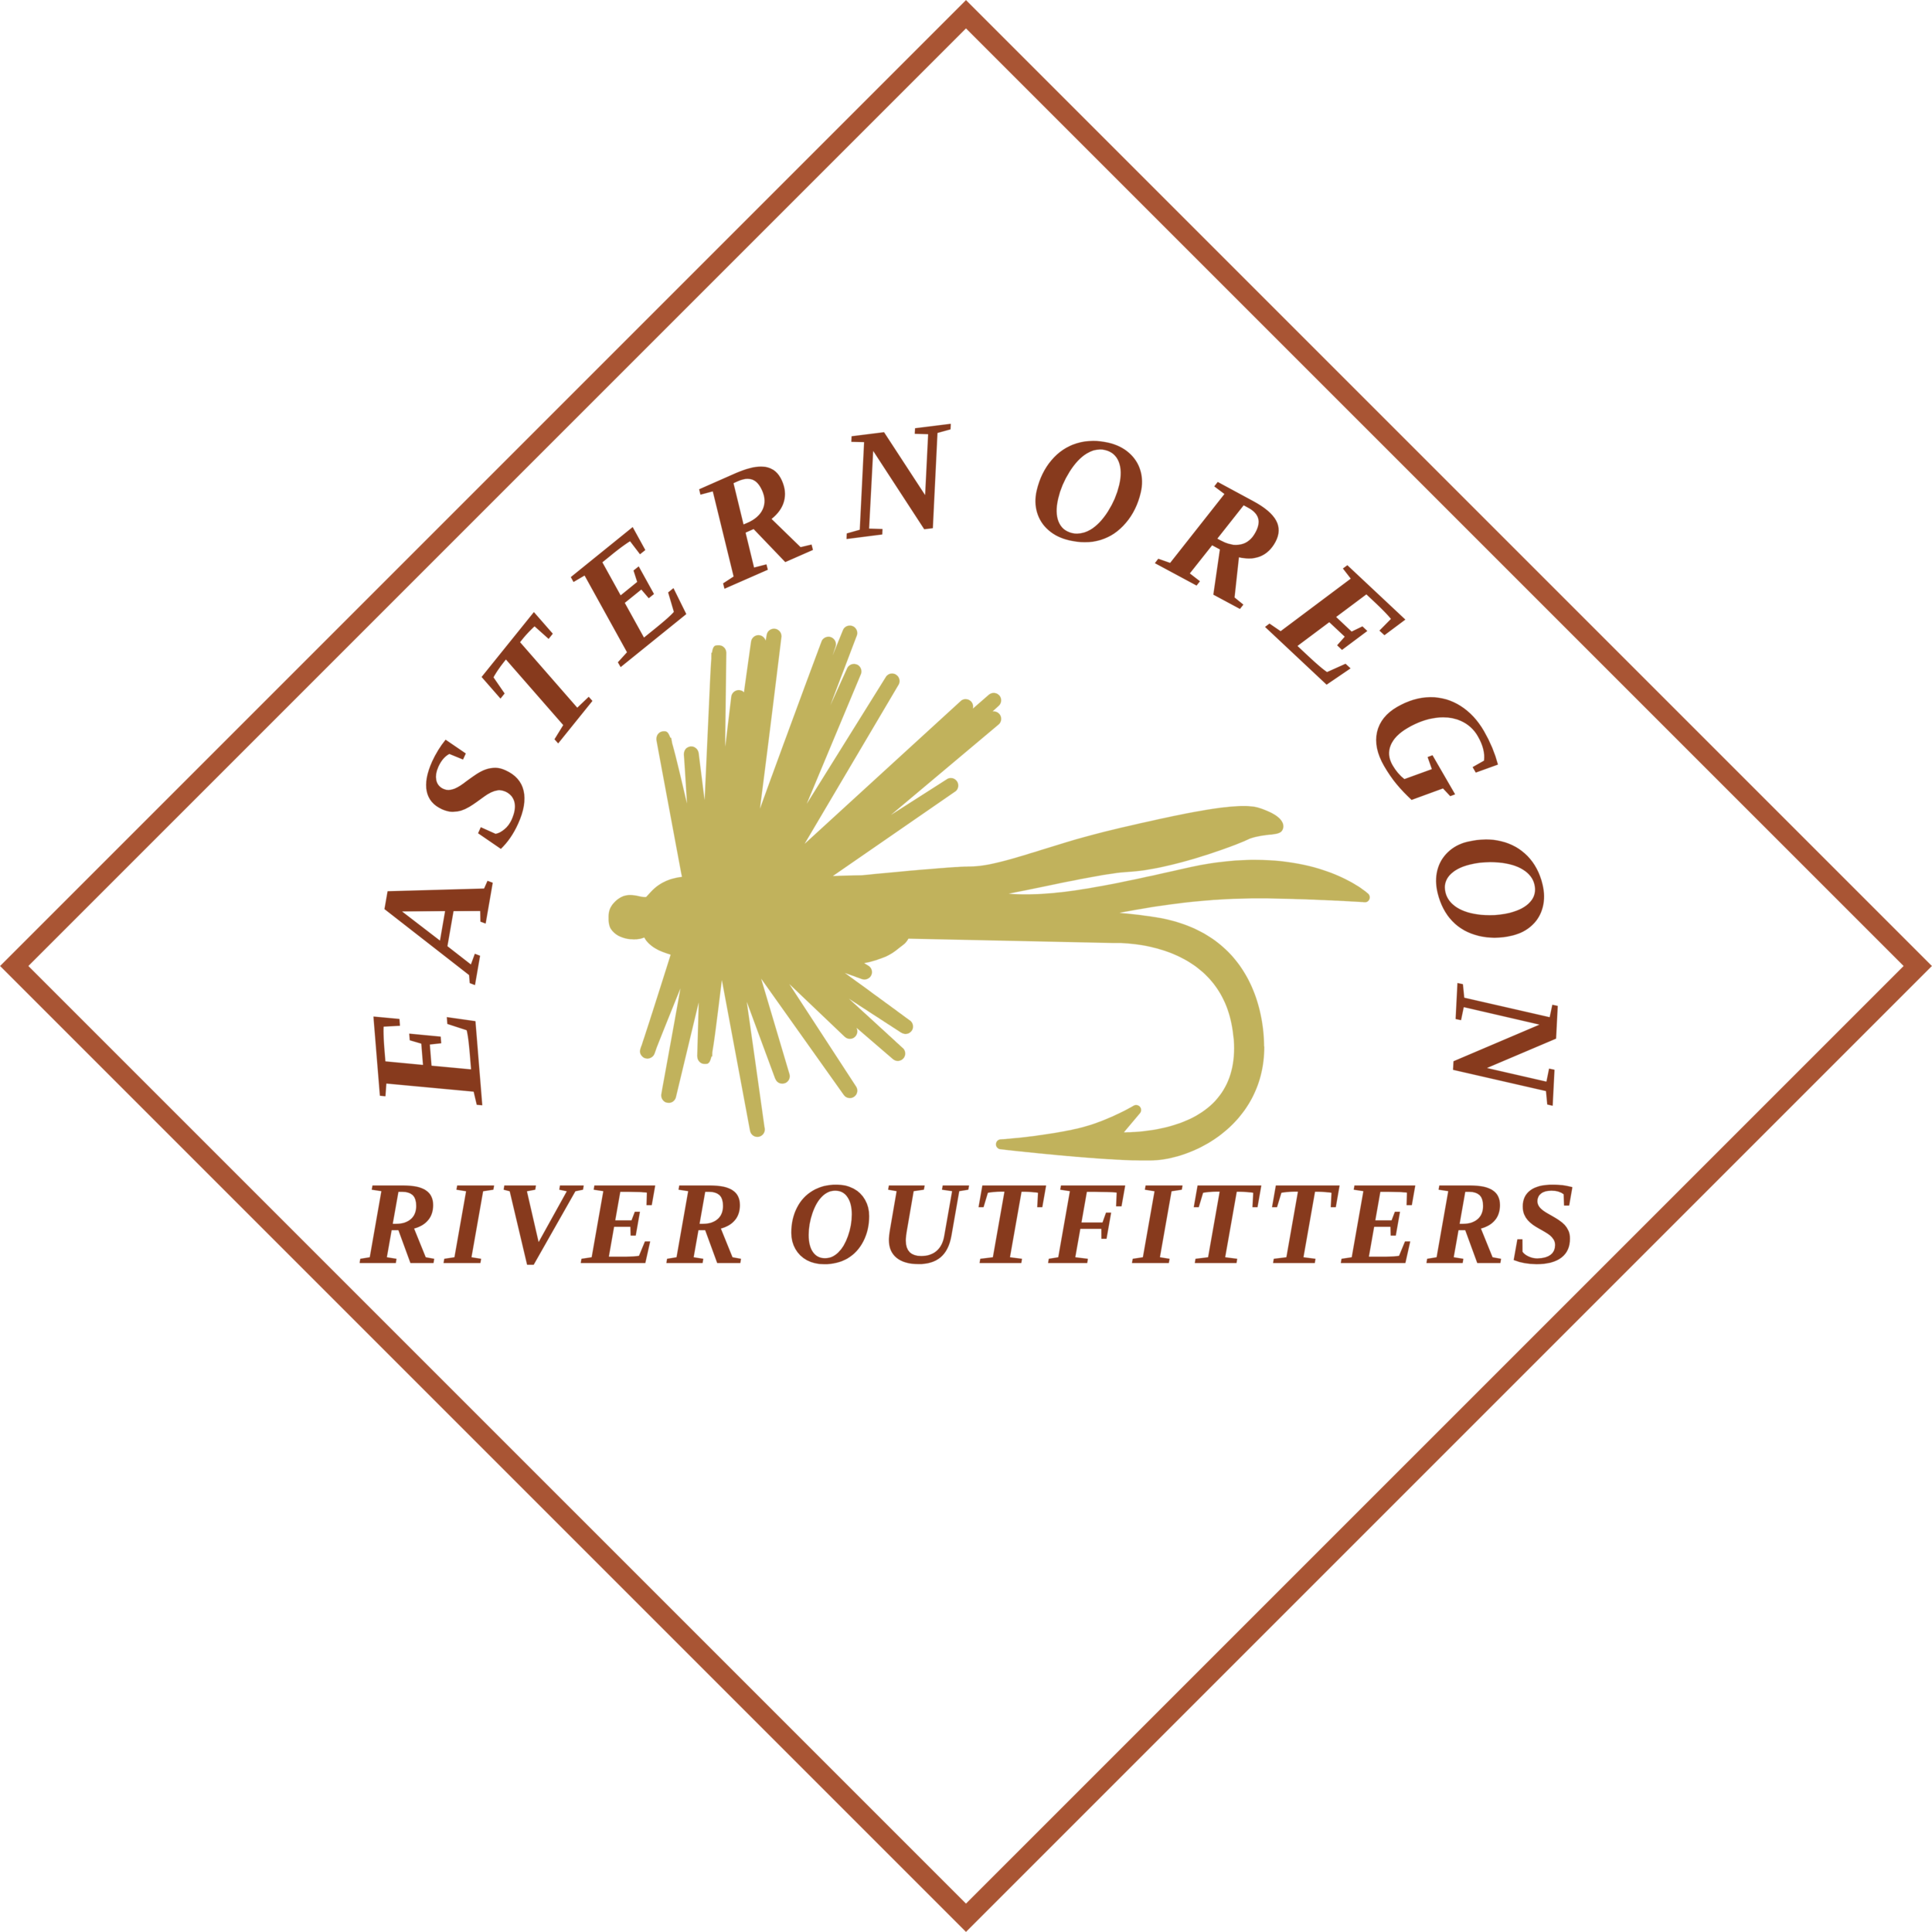 Eastern Oregon River Outfitters